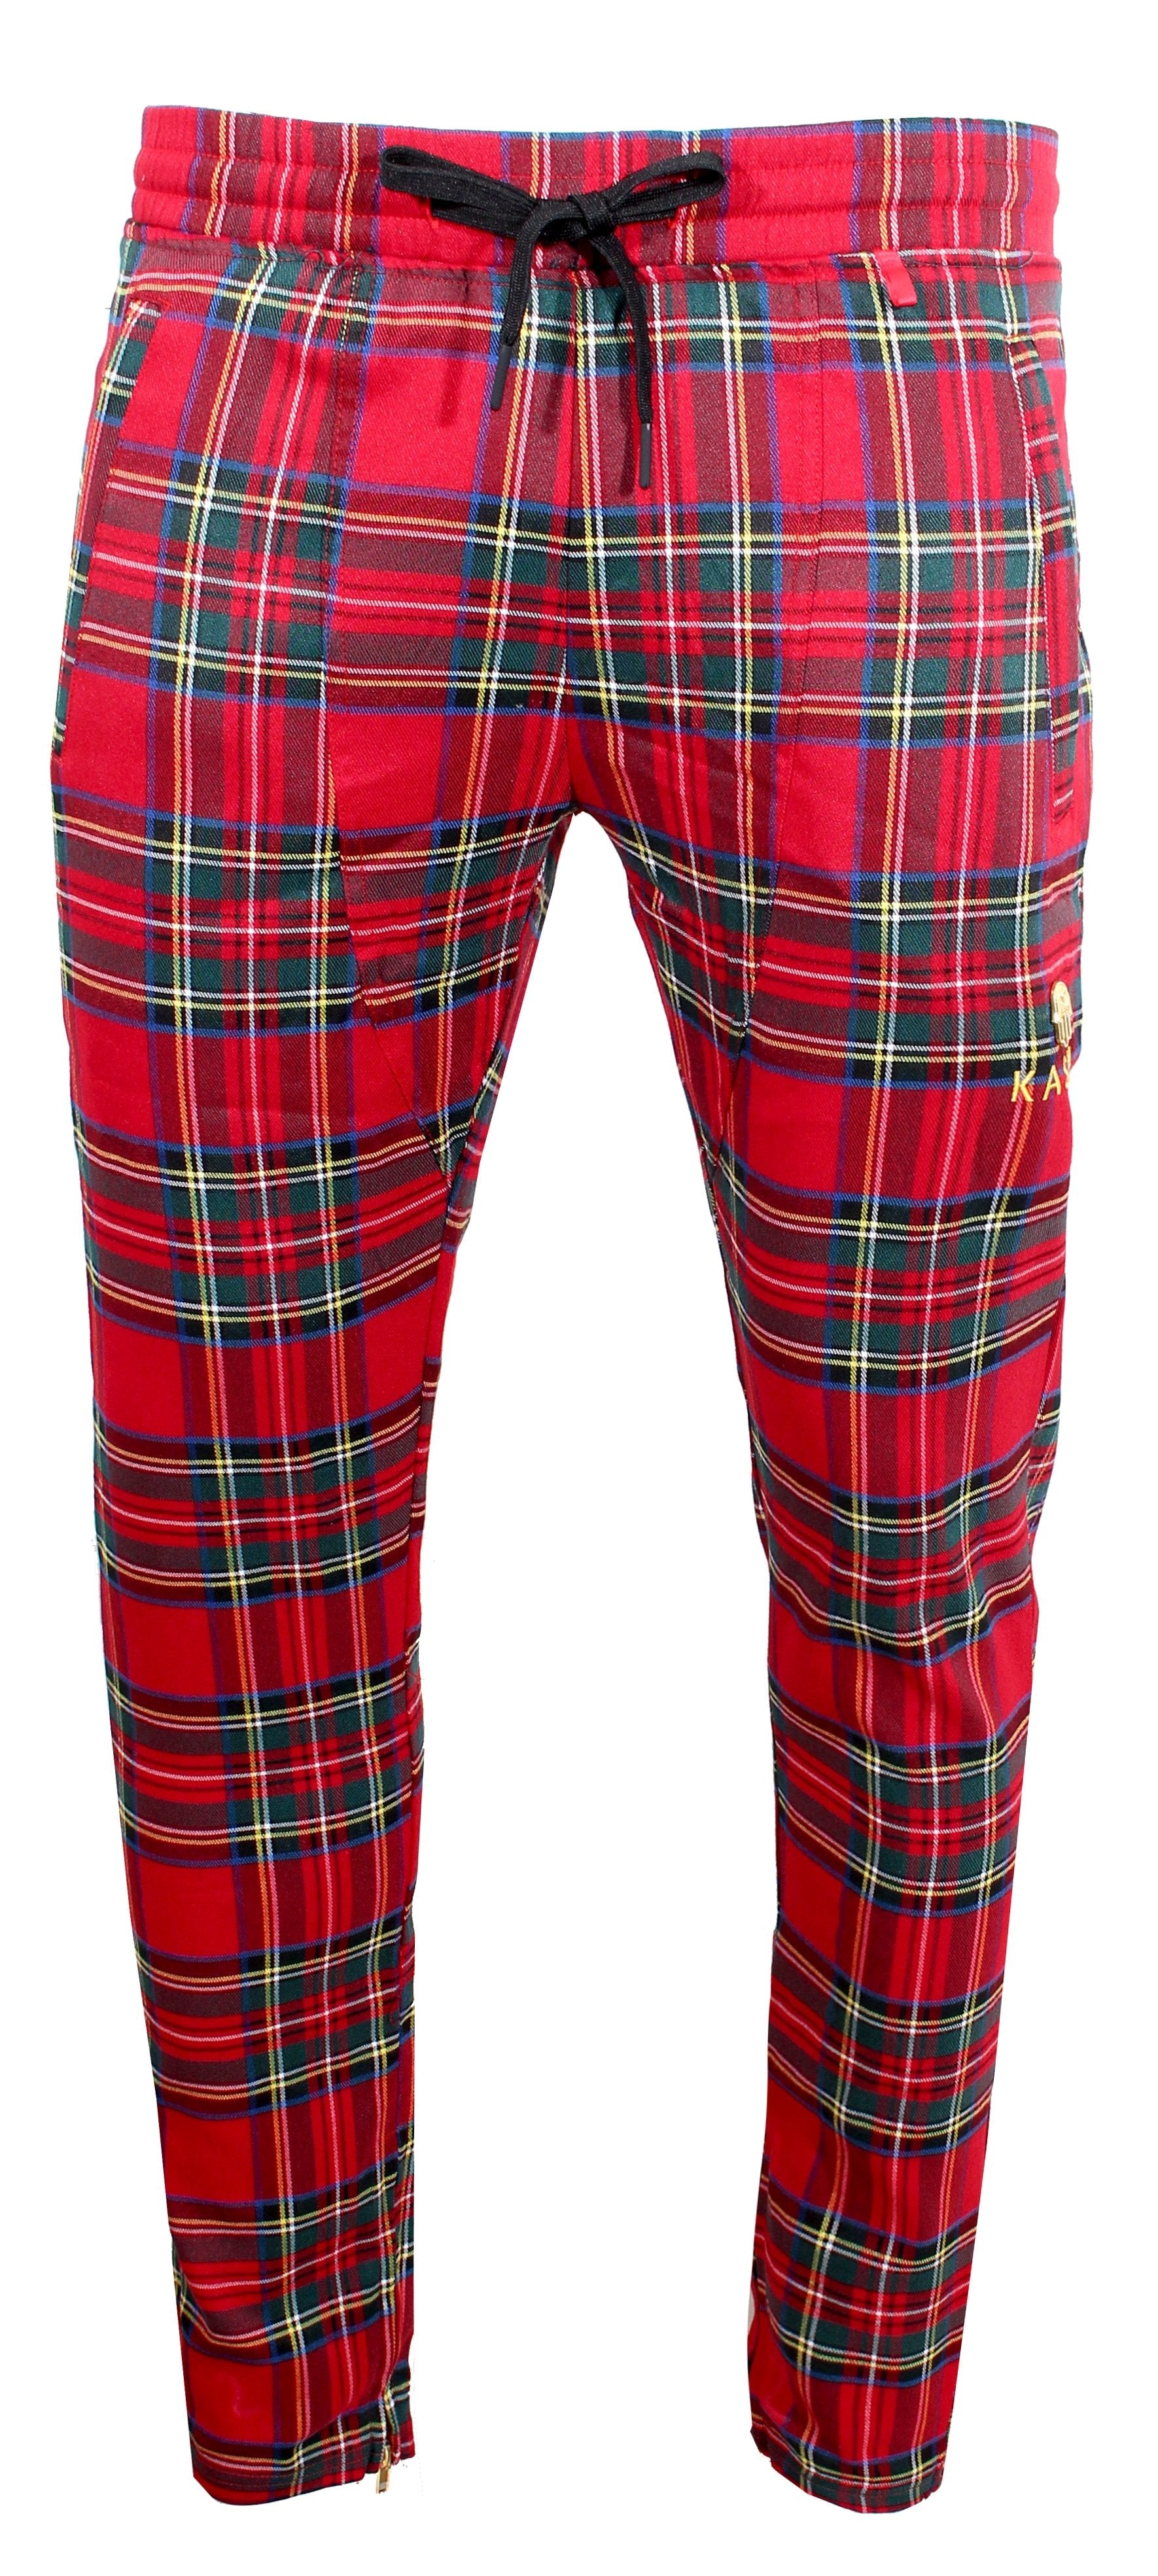 Red Plaid Track Pants with No Stripes & Embroidered 'KASH' on Thigh